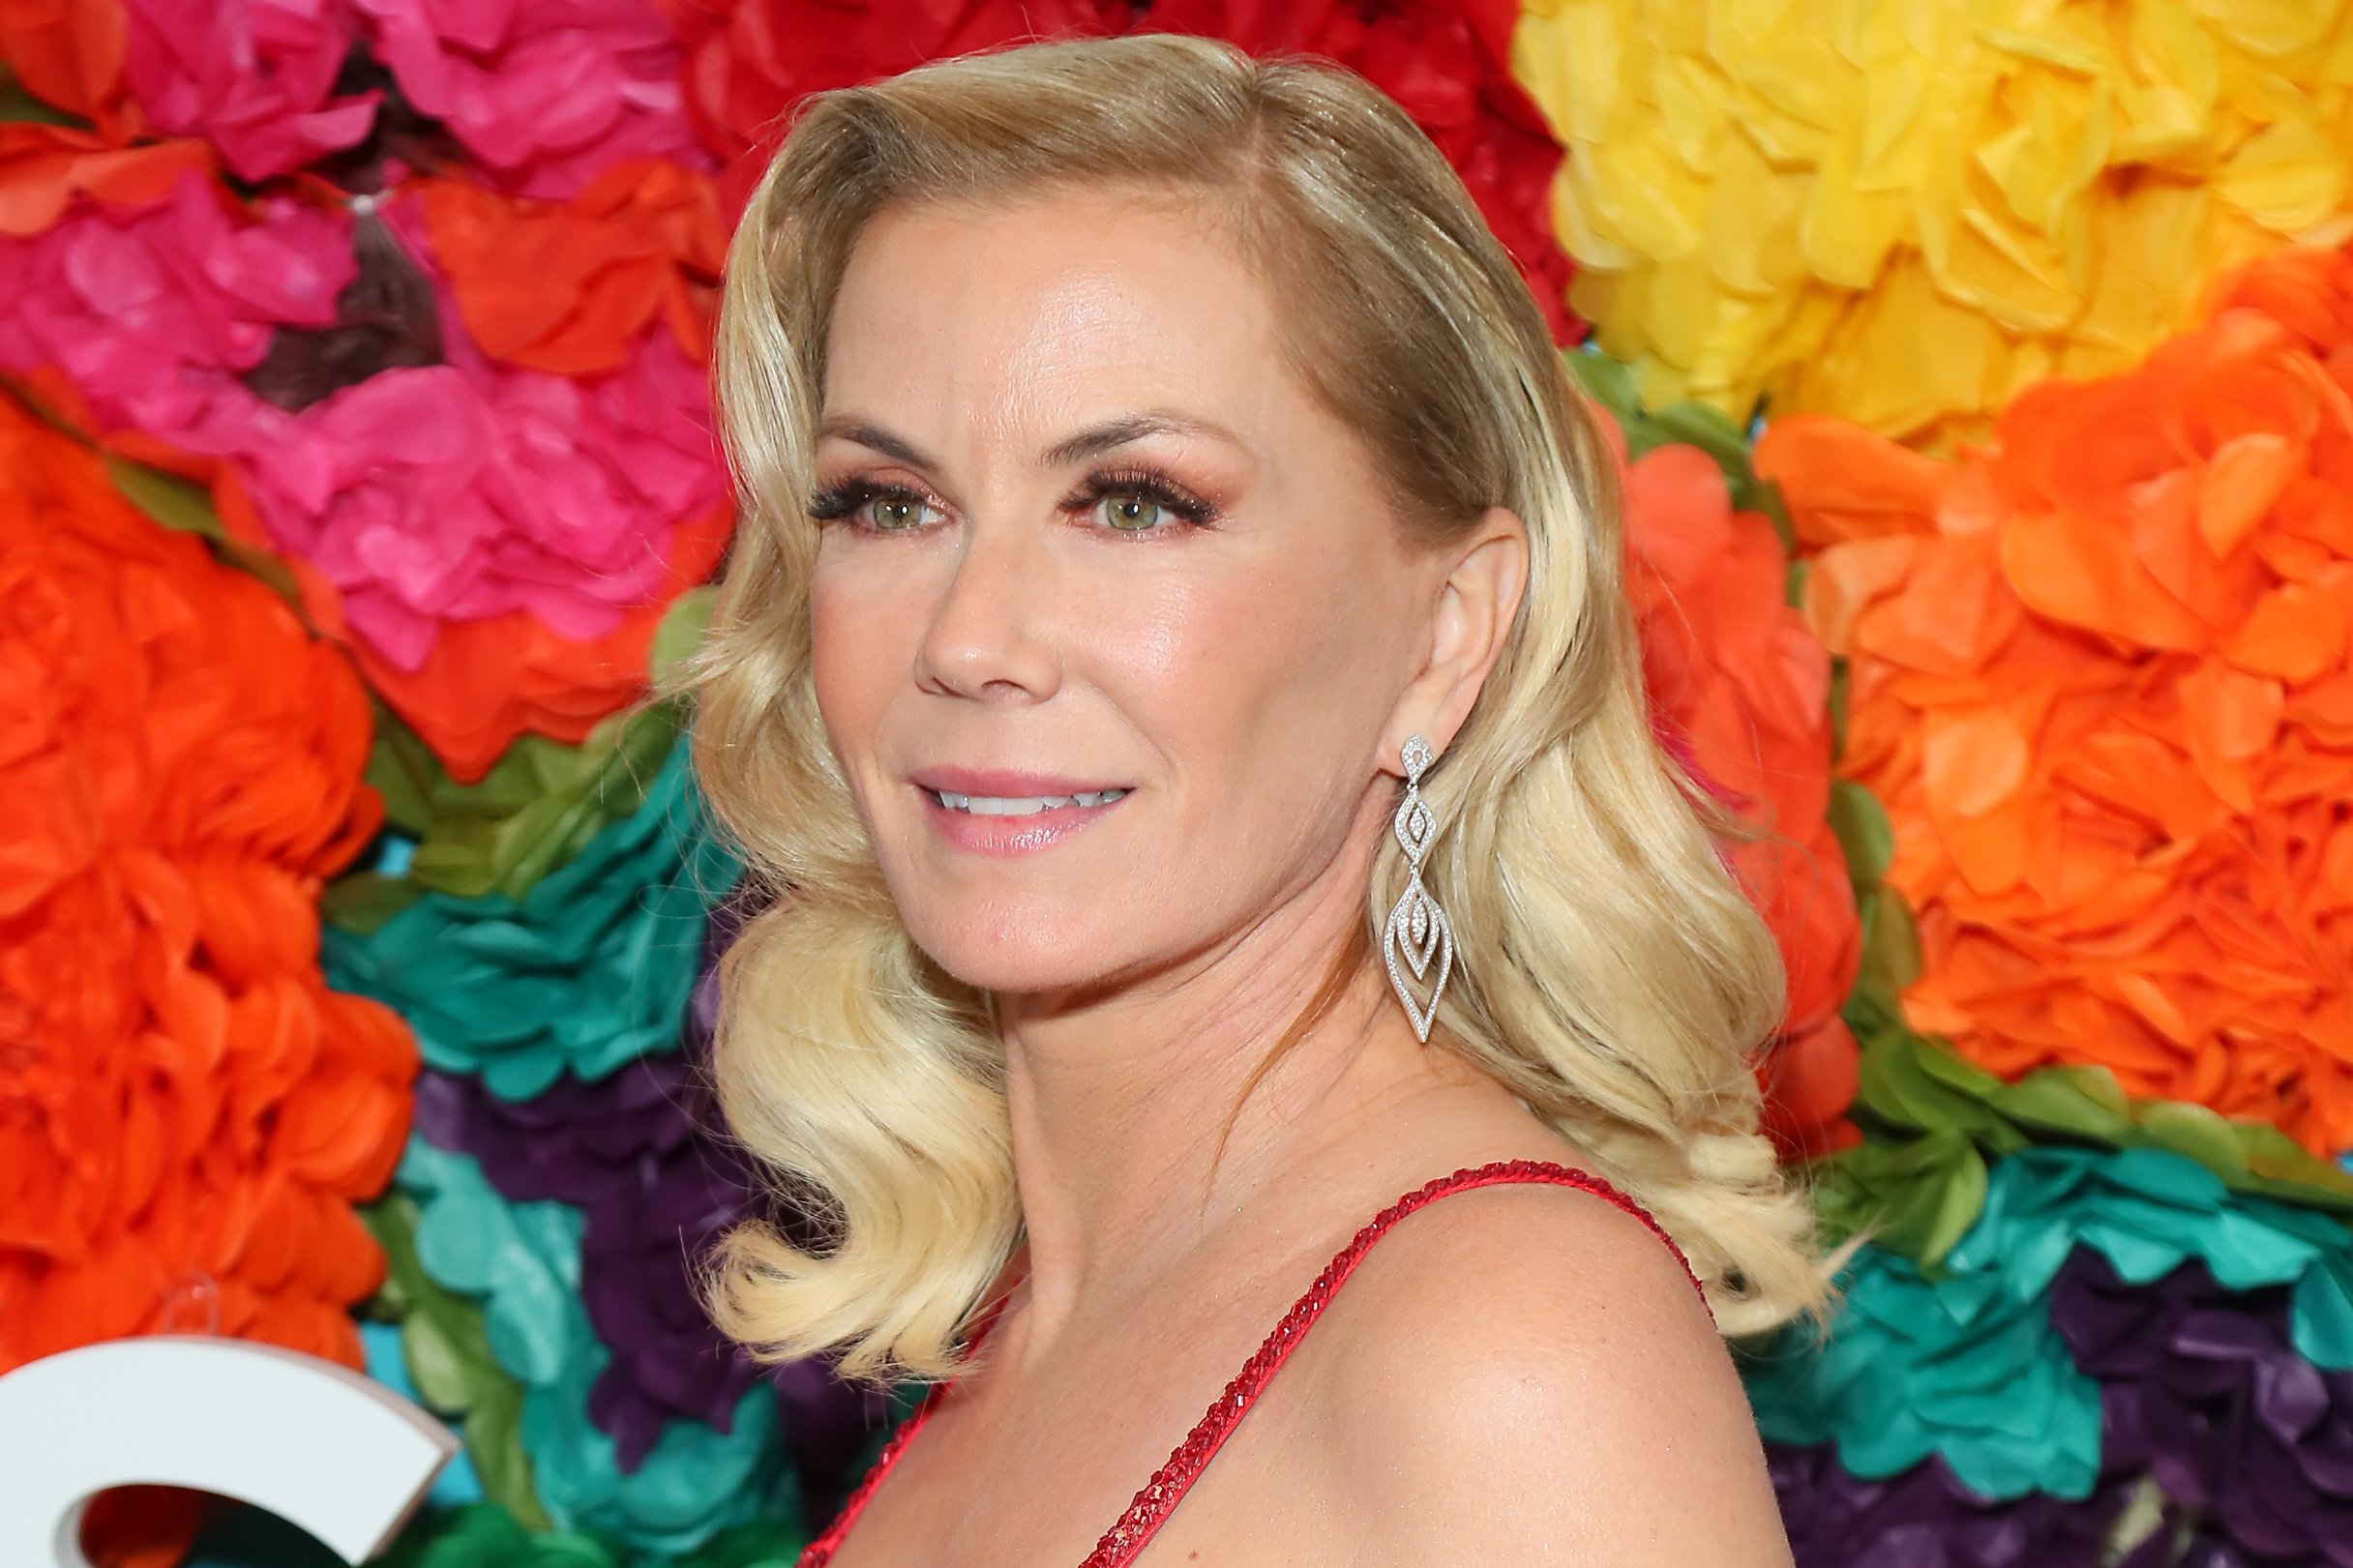 'The Bold and the Beautiful' actor Katherine Kelly Lang wearing a red dress and posing in front of a floral backdrop.